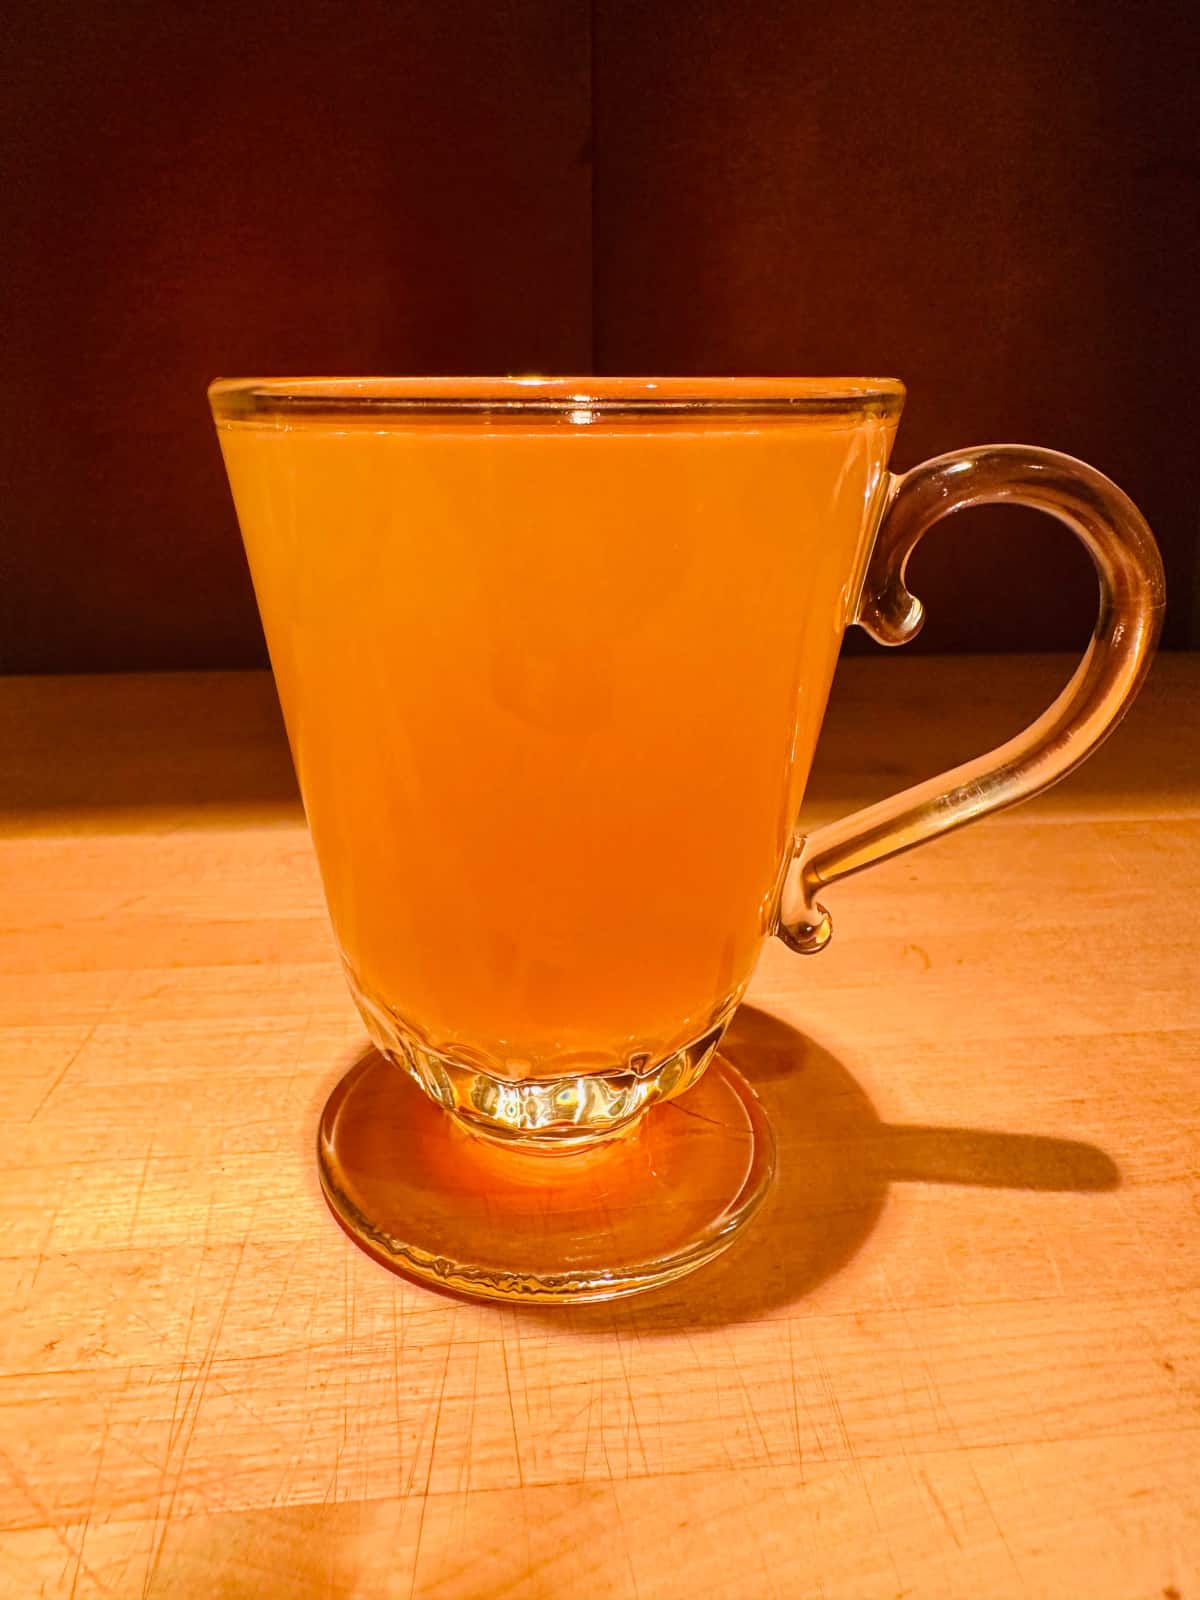 Golden colored whiskey hot toddy in a glass mug.